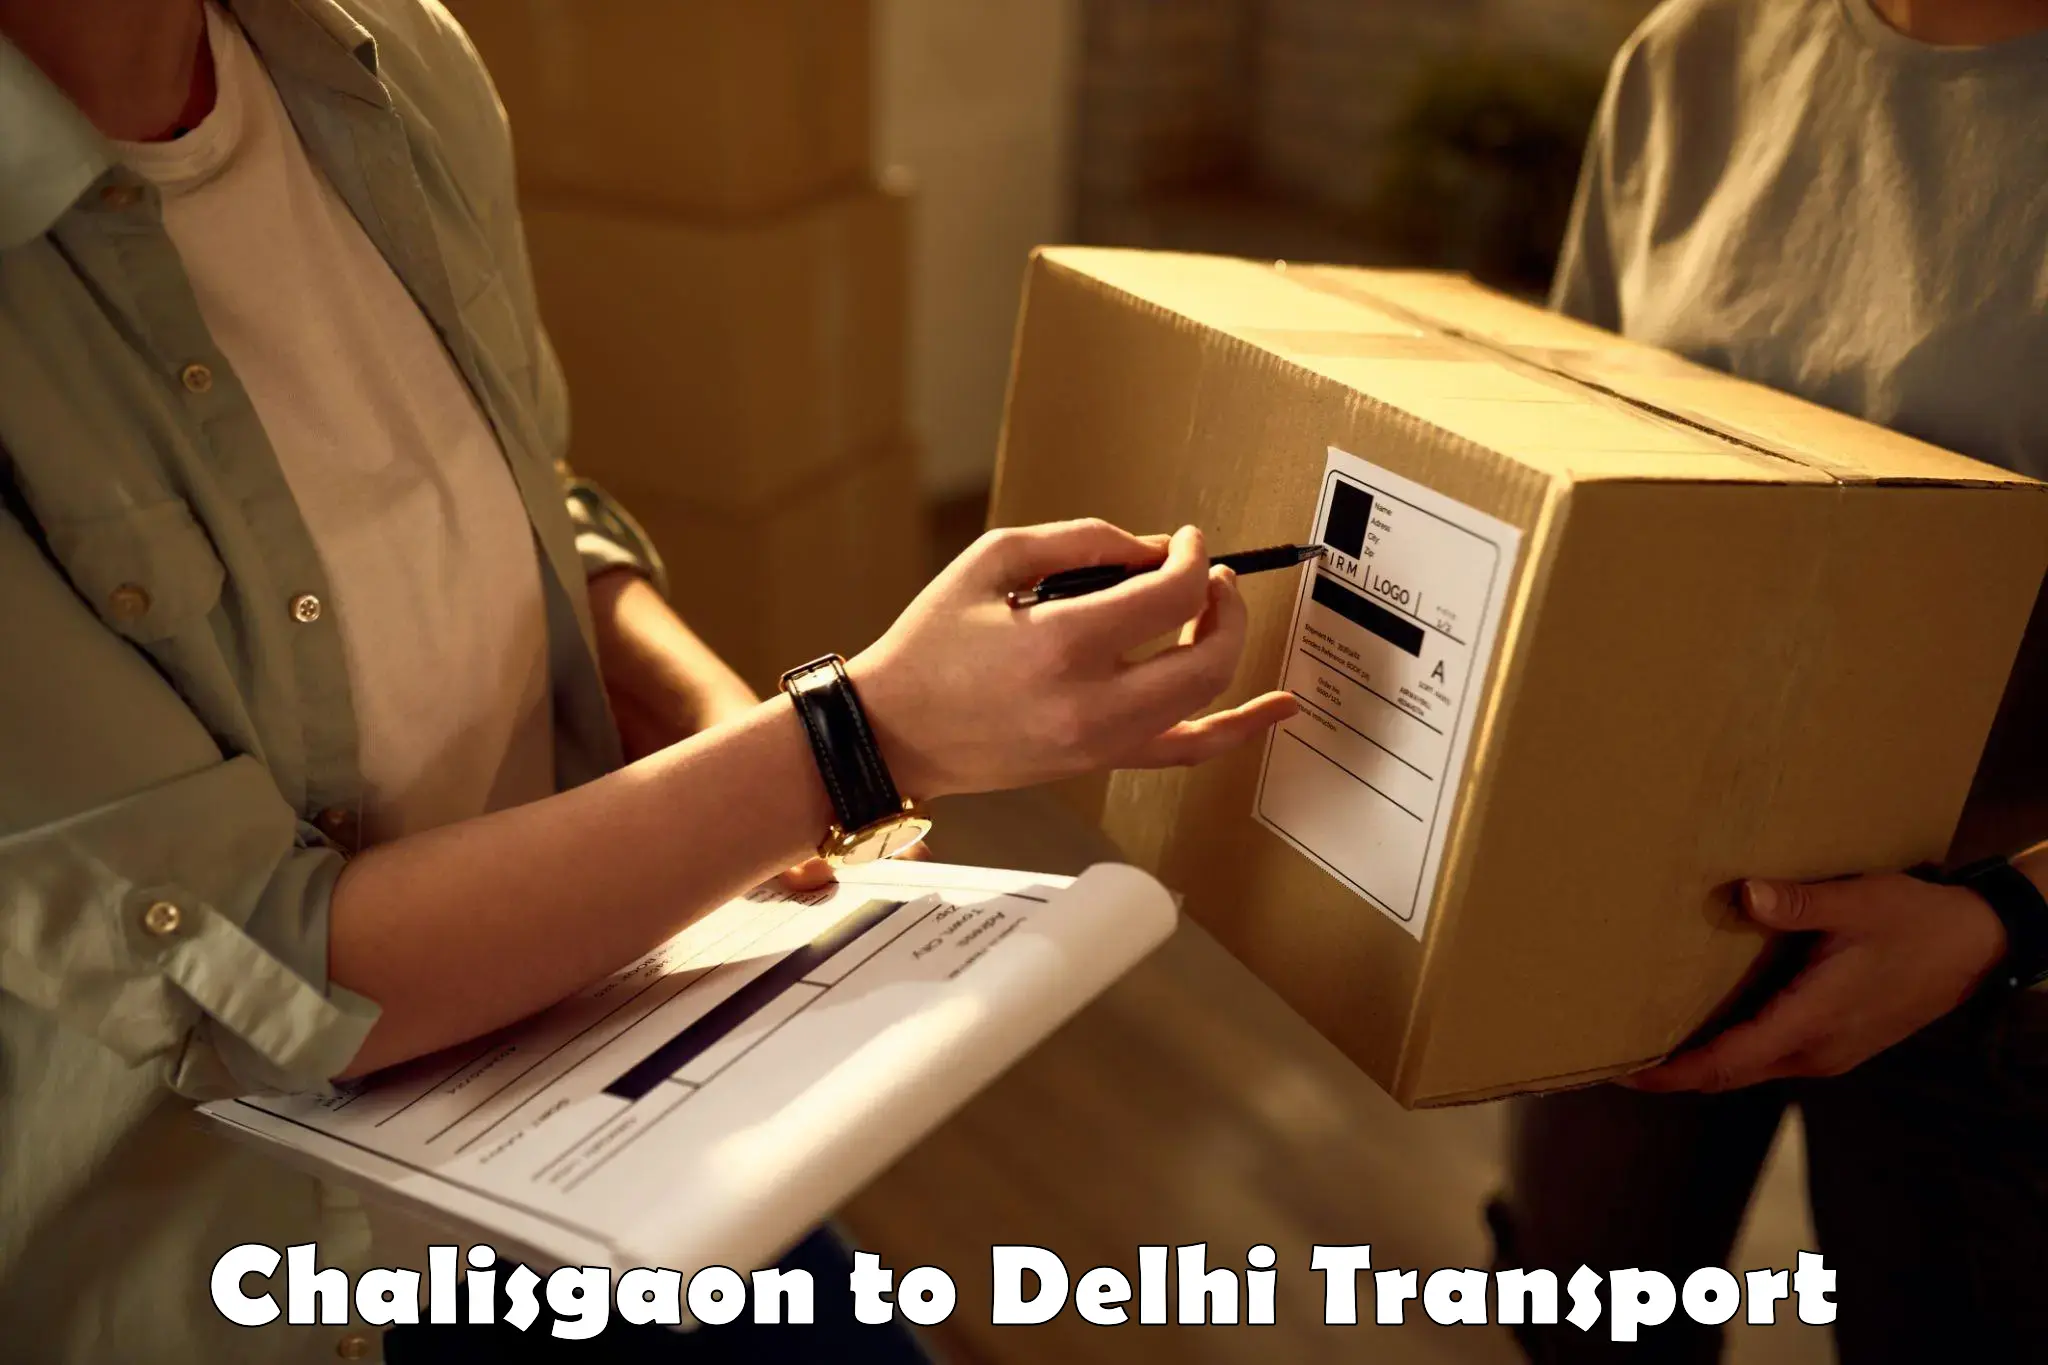 Delivery service Chalisgaon to NCR